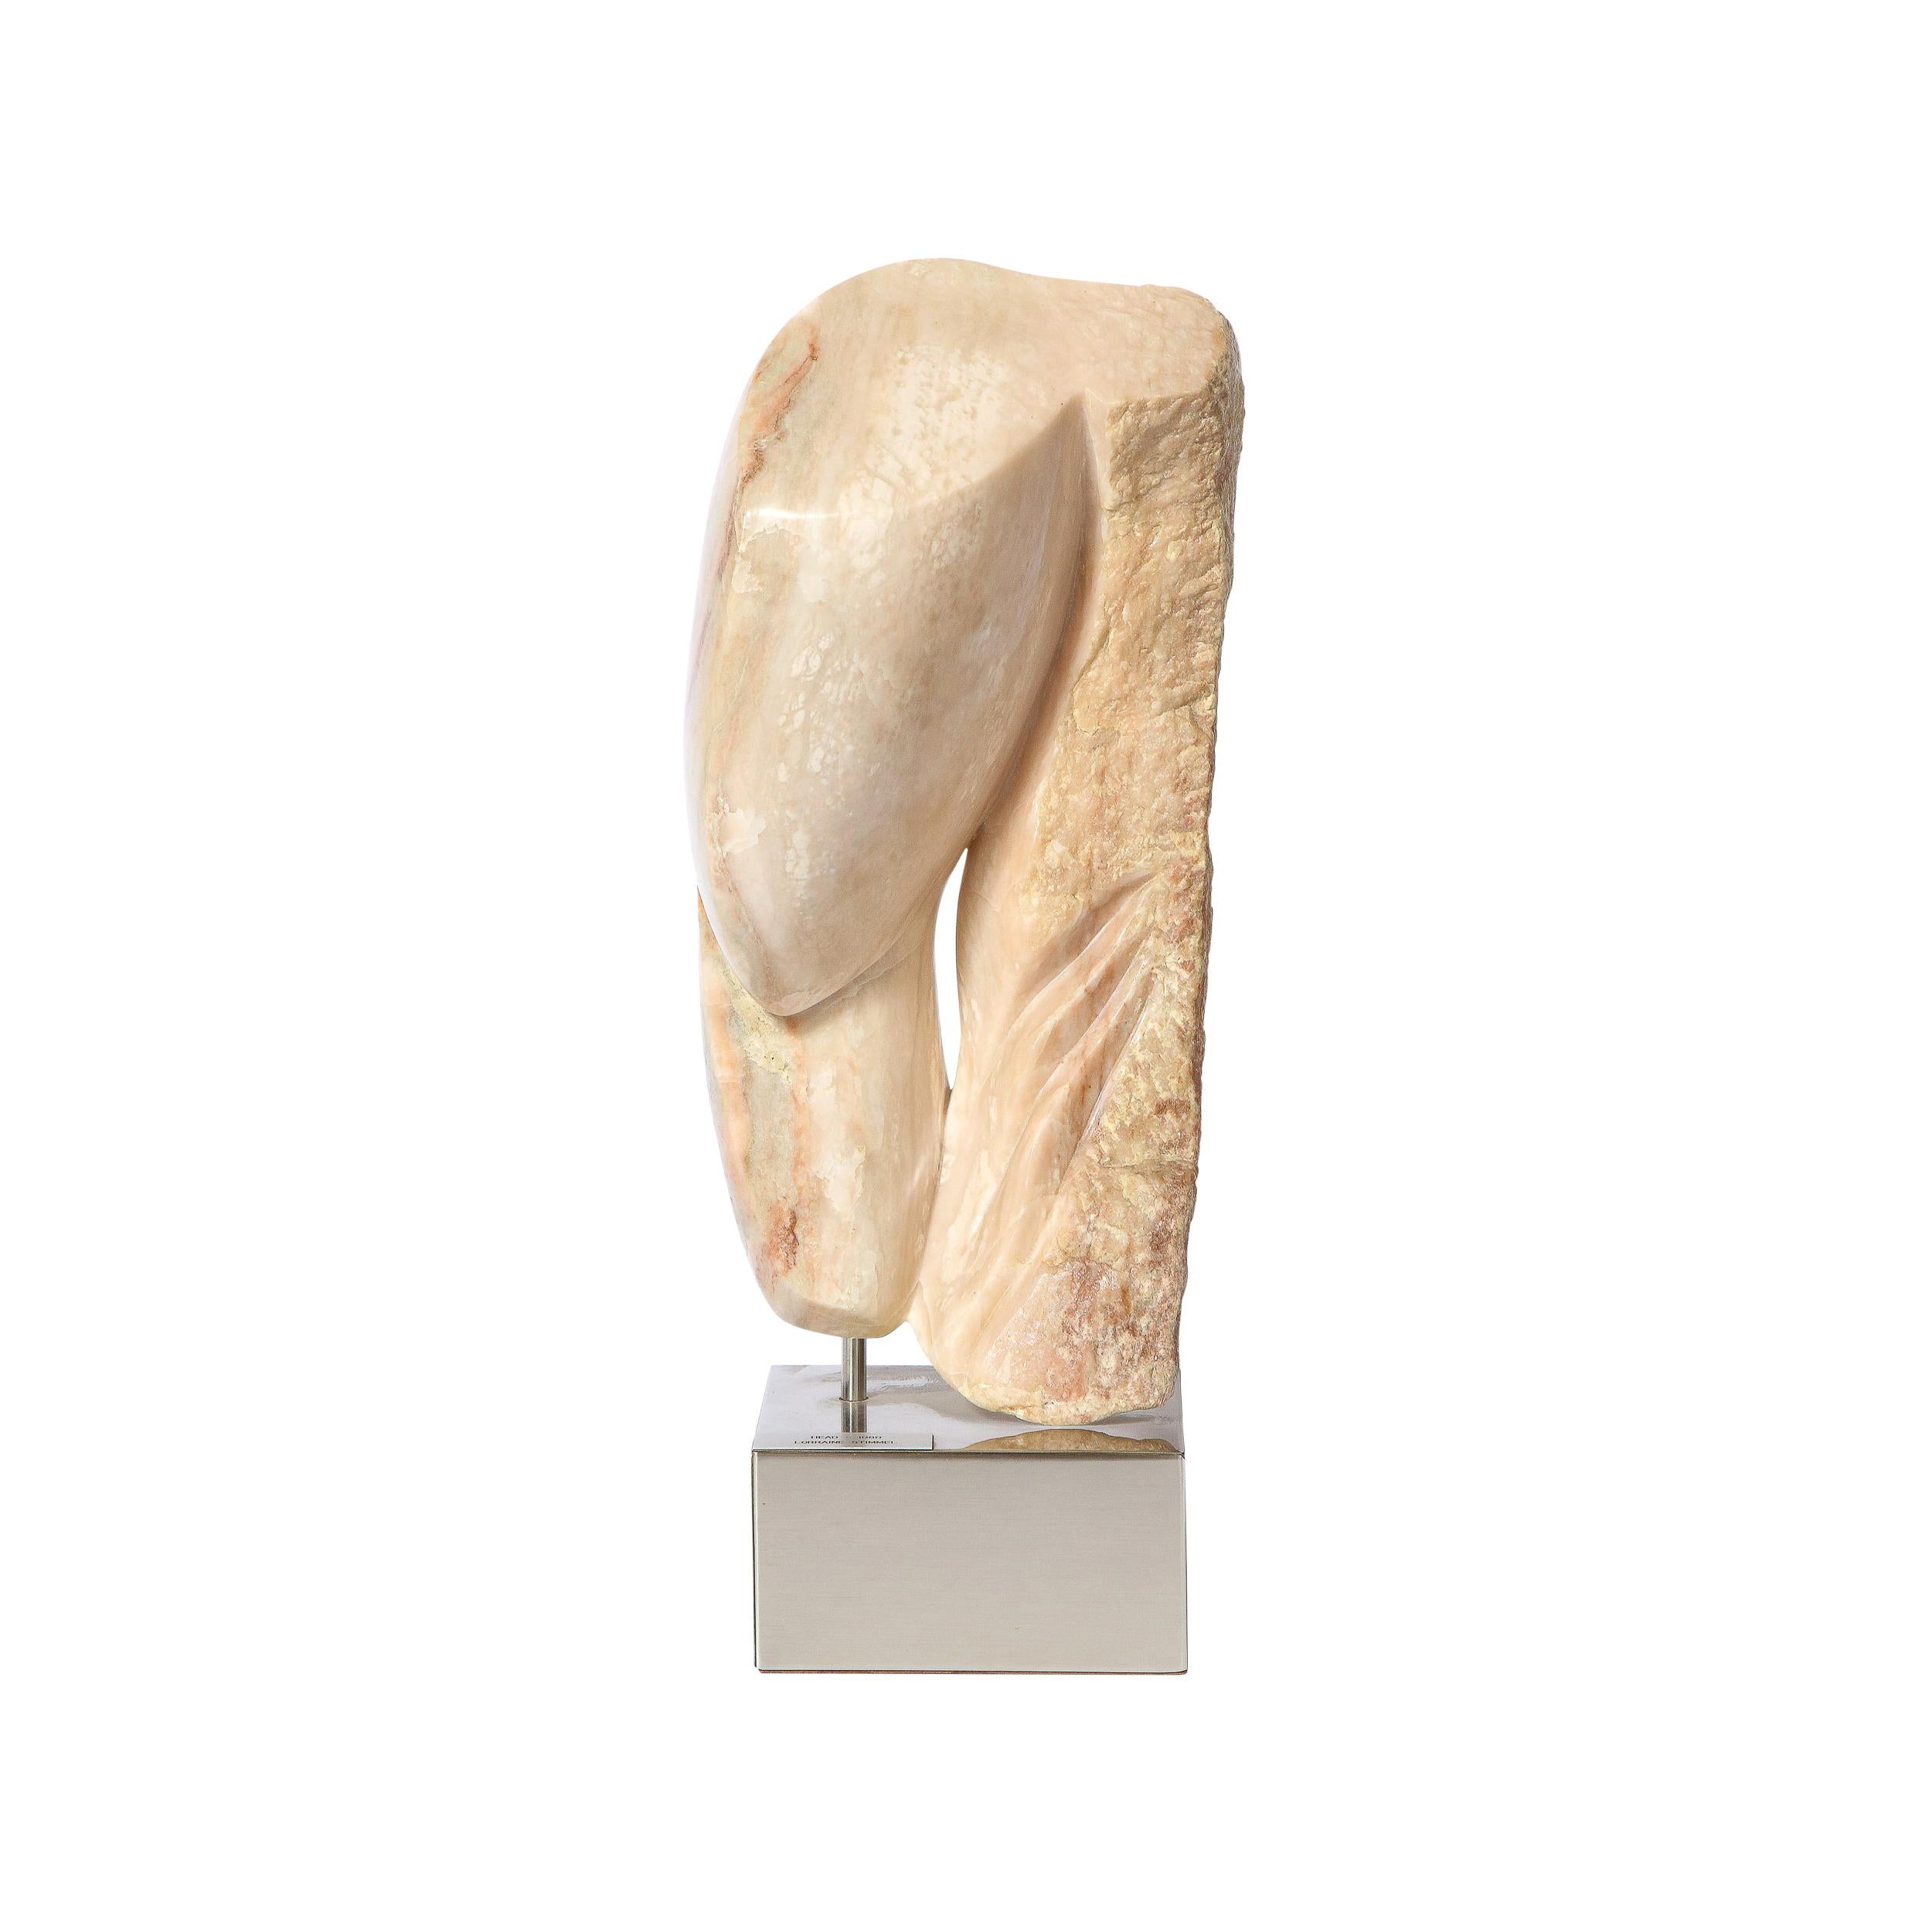 Modernist Abstract Figurative Sculpture in Exotic Marble by Lorraine Stimmel